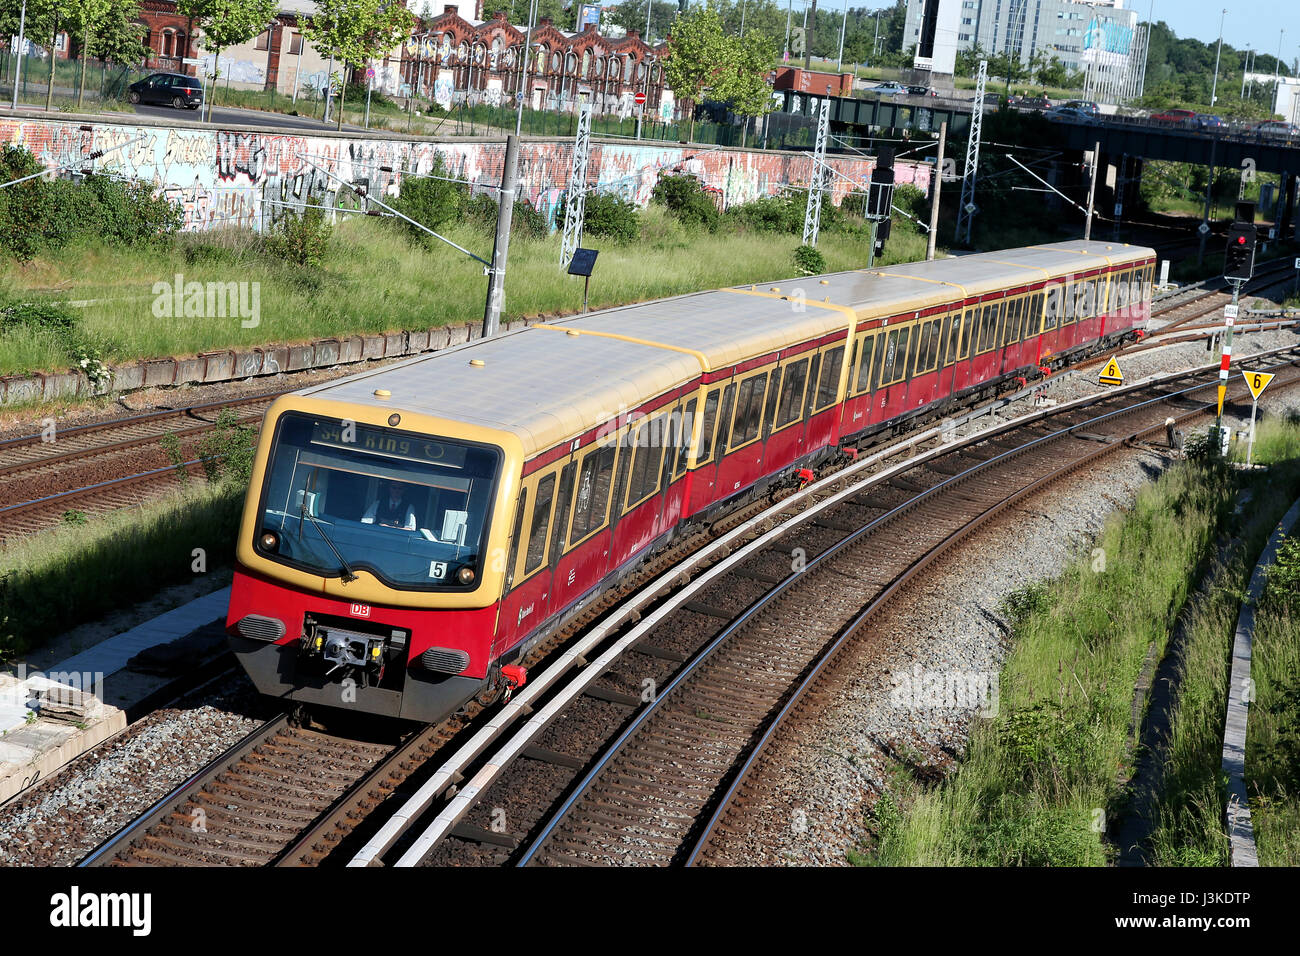 Class 481 train of the Berlin S-Bahn, a rapid transit railway system in and around Berlin, the capital city of Germany. Stock Photo